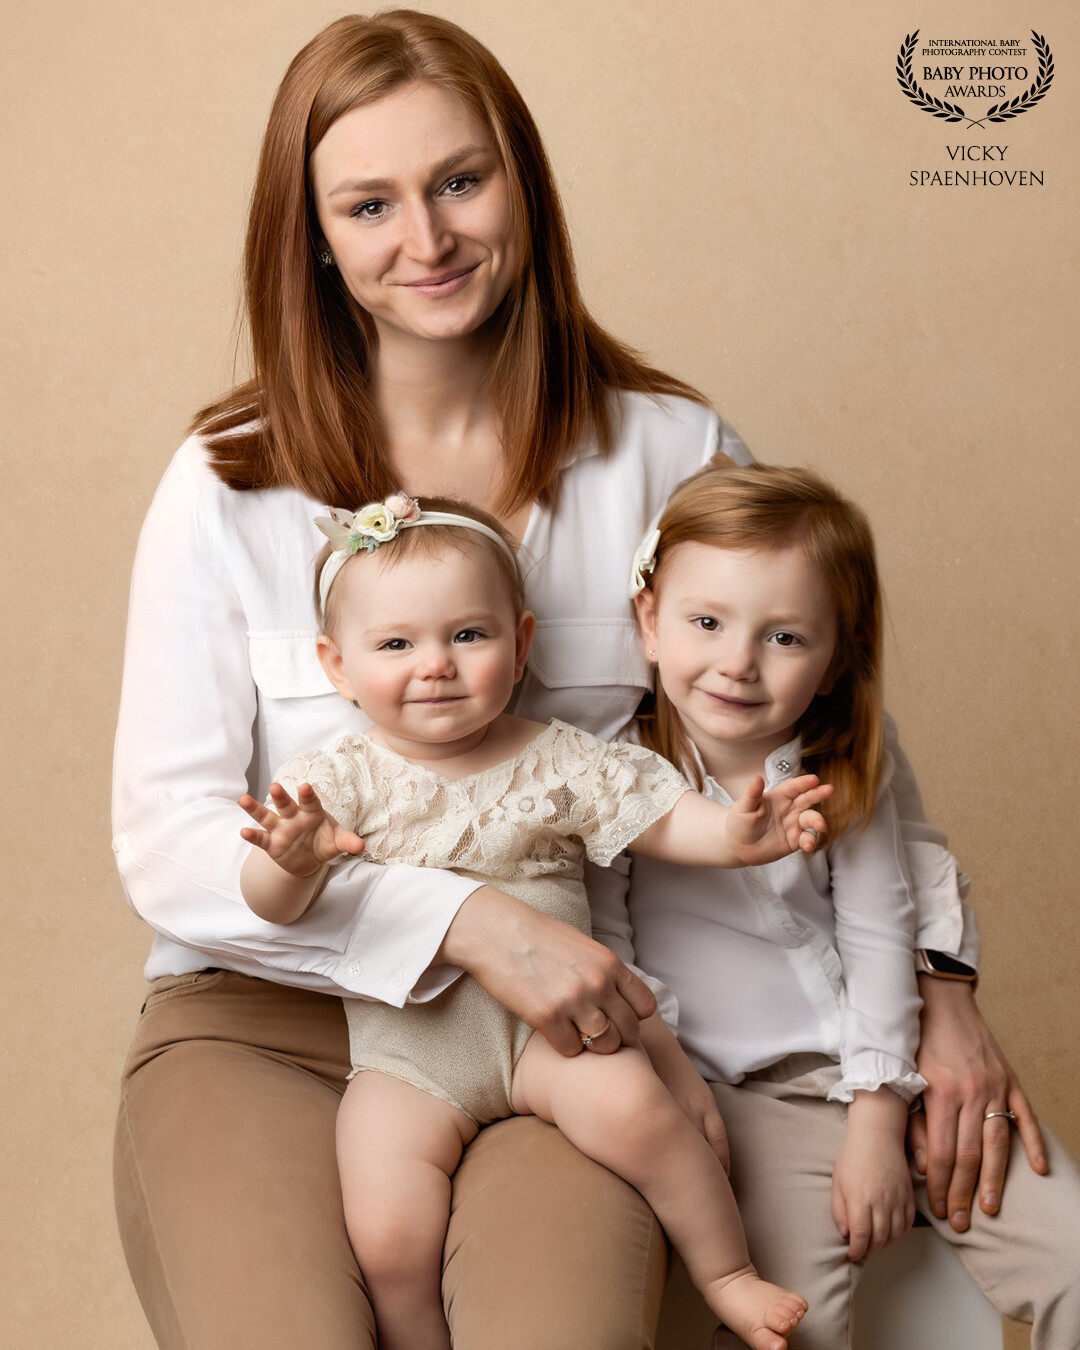 Beautiful mom Valerie with her two lovely girls. I love the soft and warm color tones in this picture and the beautiful smiles on their face.